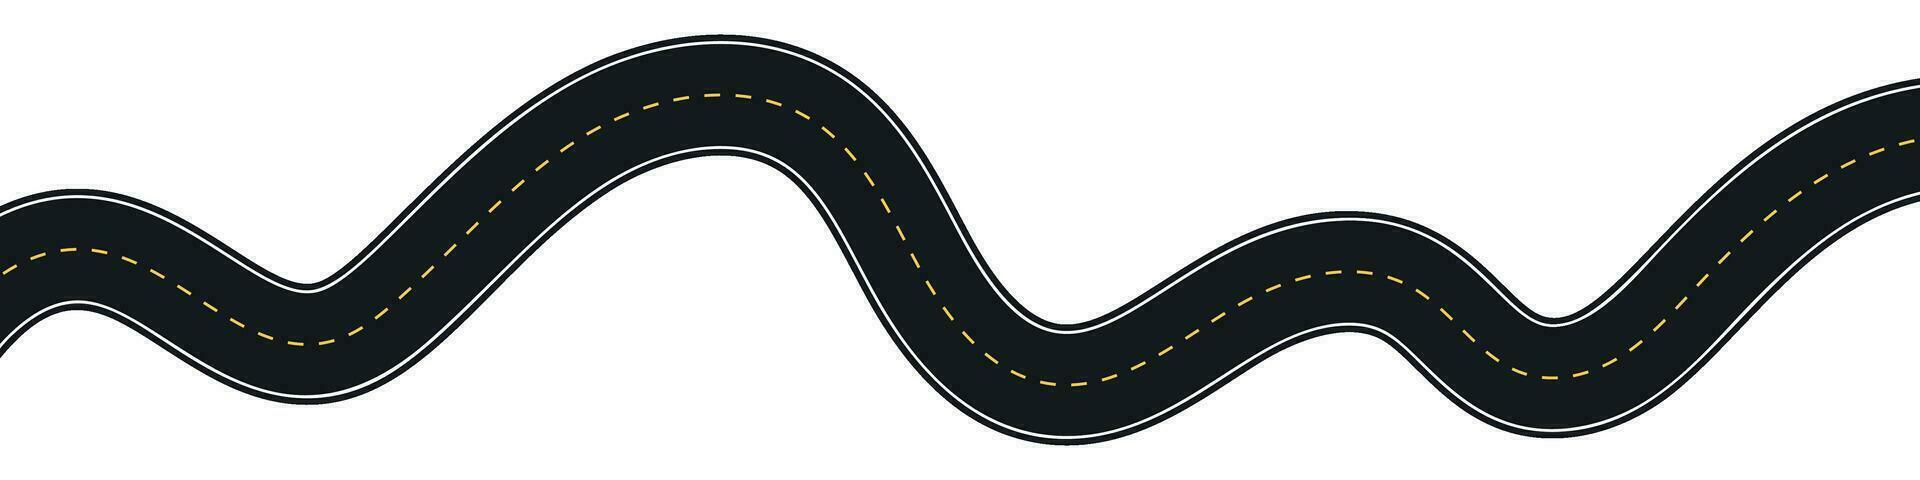 Winding highway road from top view. Flat vector illustration isolated on white background.